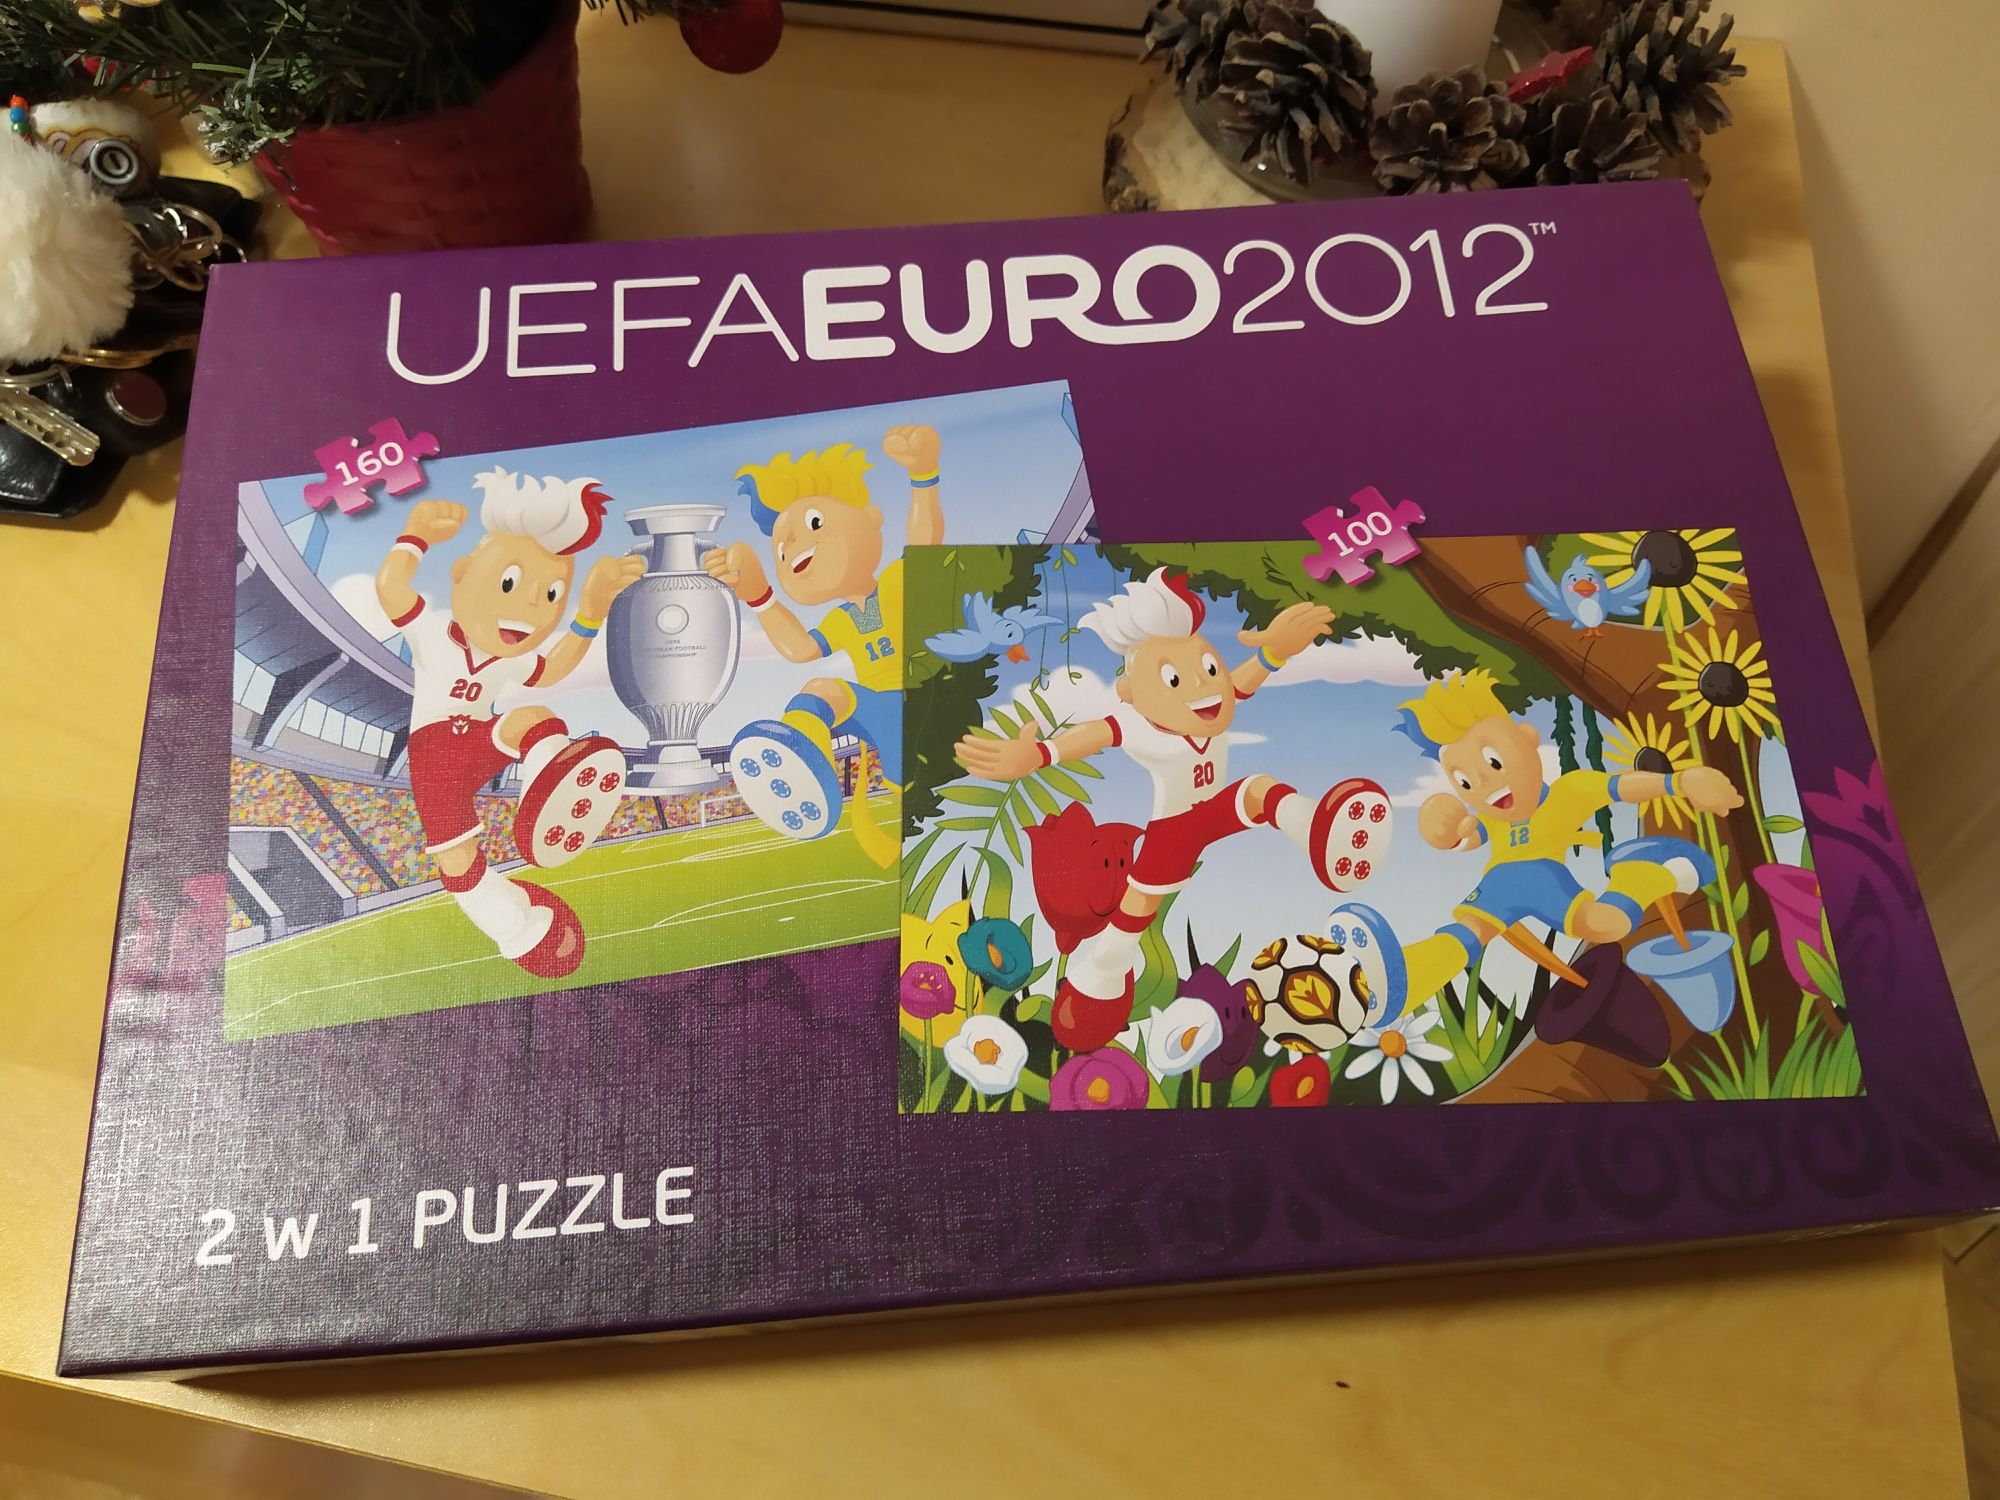 2x Puzzle toy story puzzle UEFA euro 2012 2 komplety